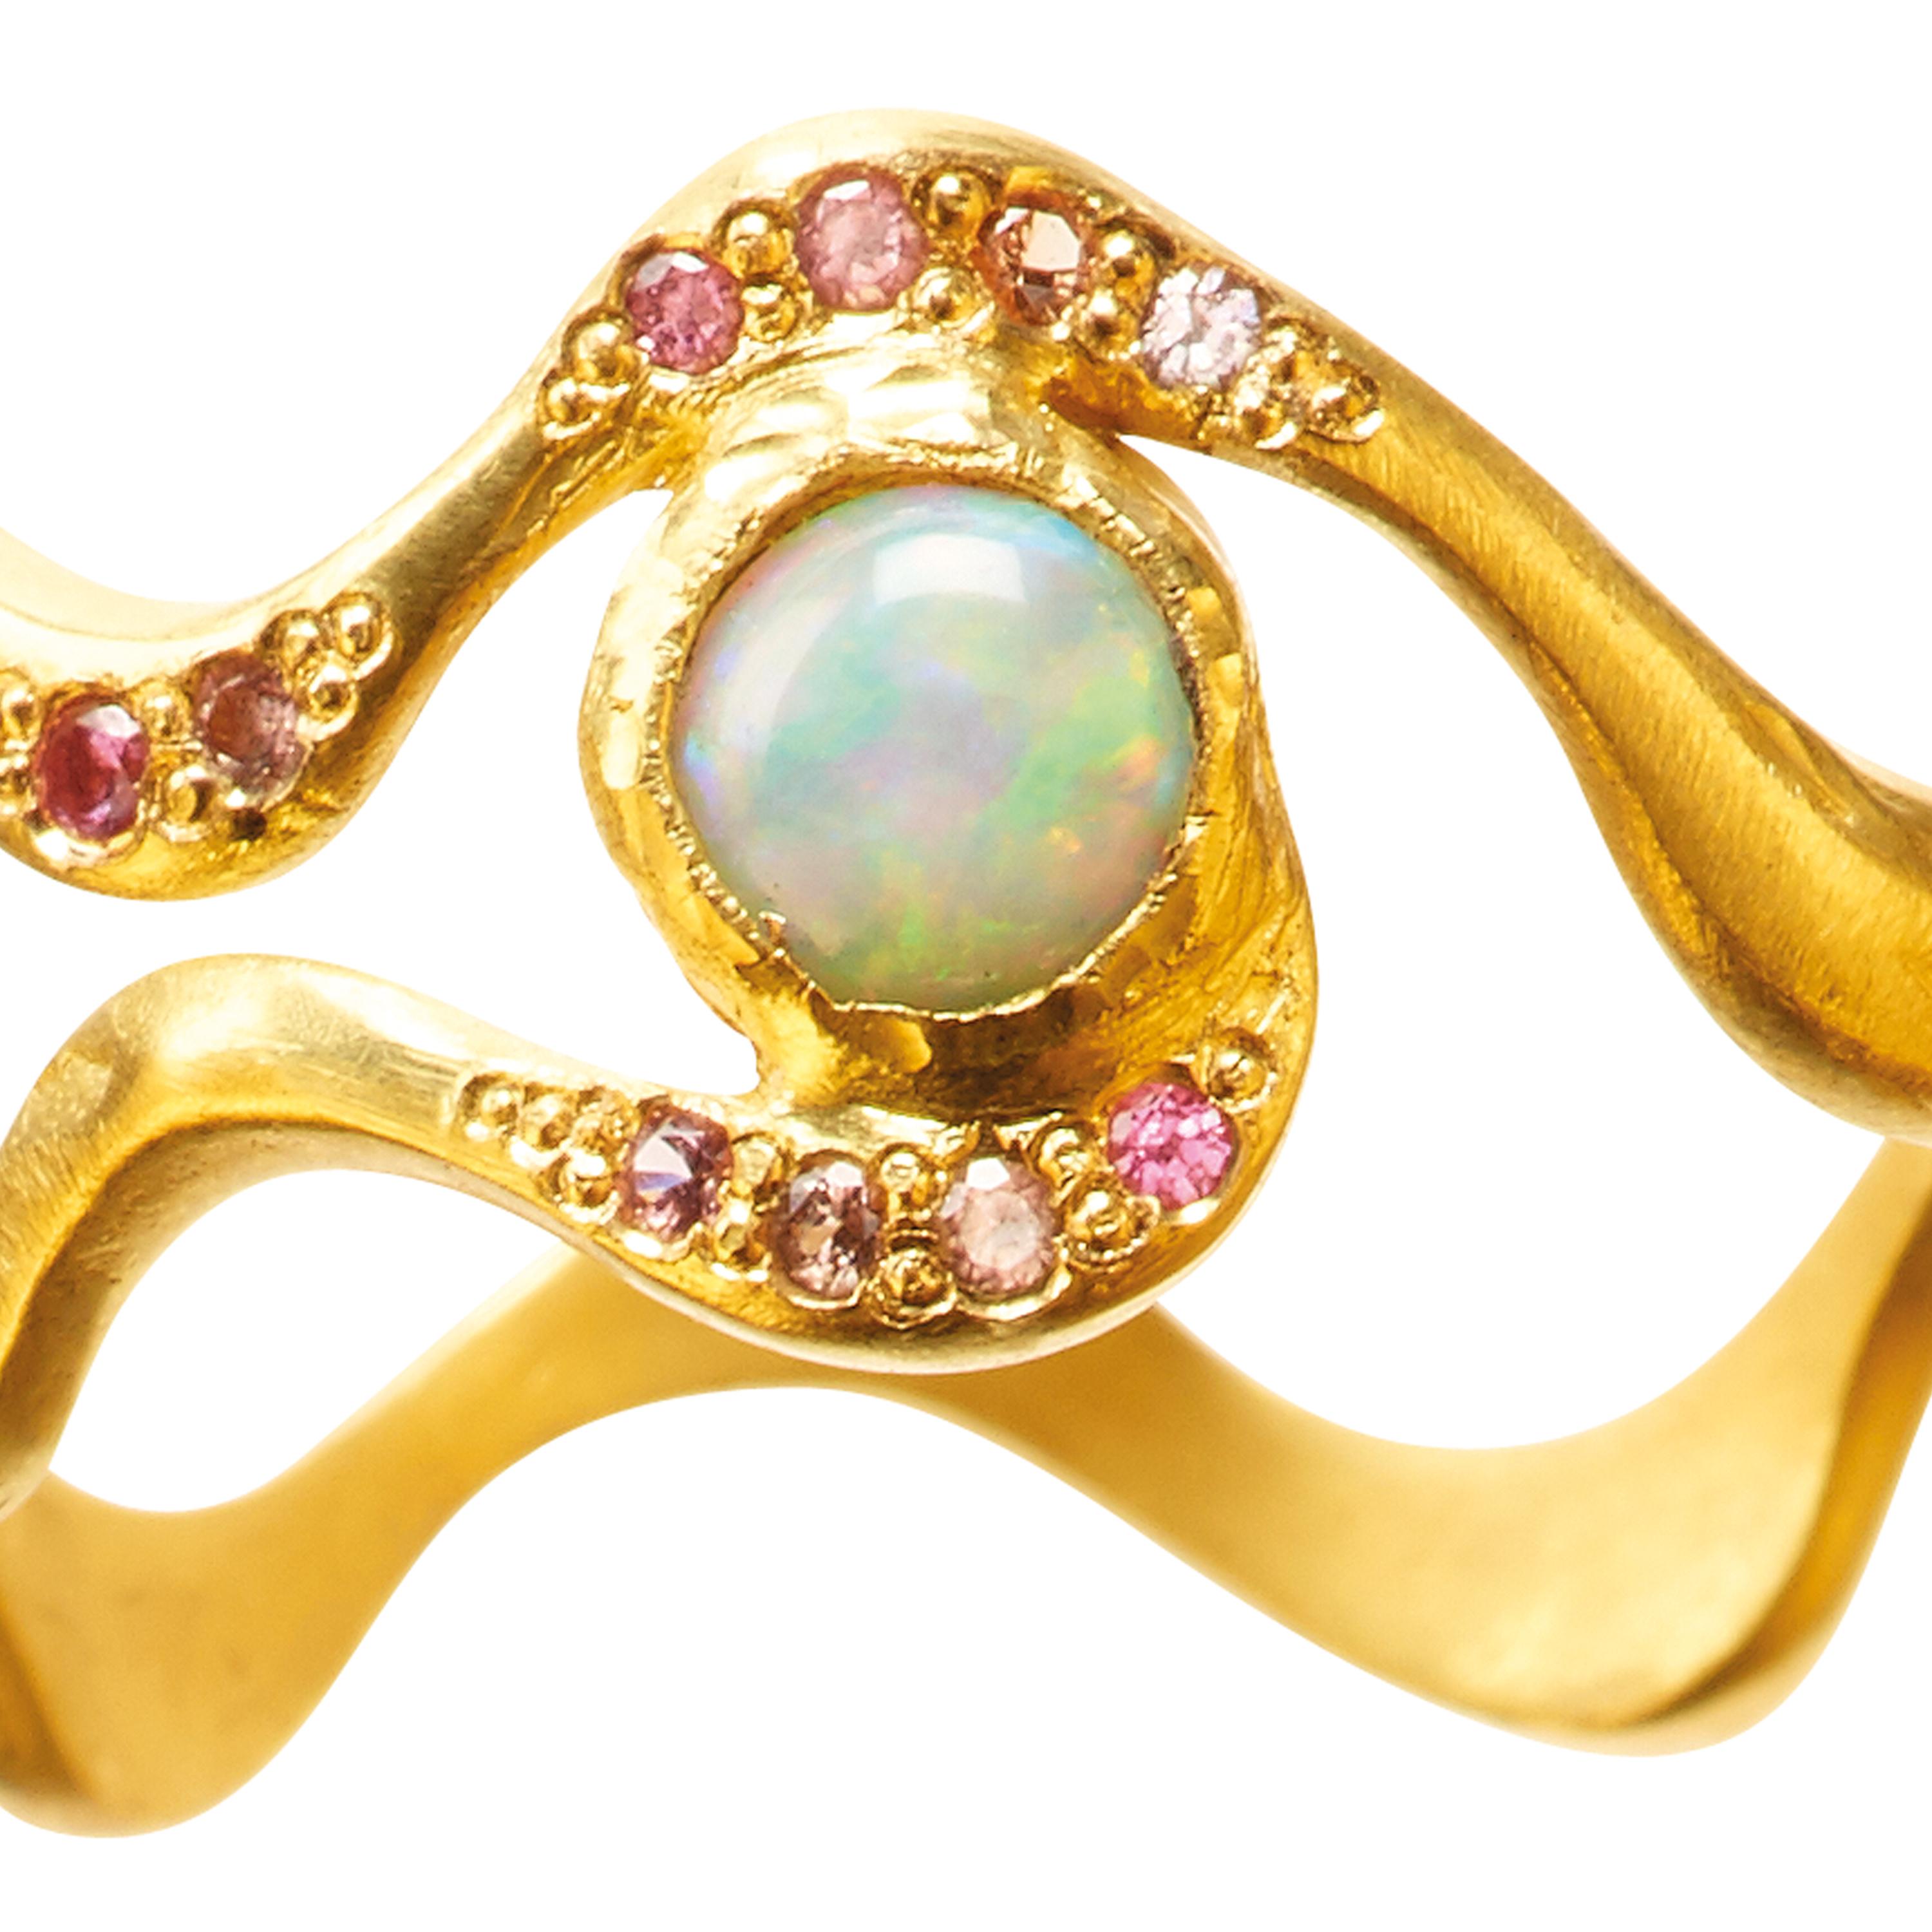 The Opal Eye ring is handcrafted in 18k gold, studded with 10 x spinels & 1 white water opal. It is beautiful on its own or combined with other ELHANATI rings.

The ring is from Mark Me Pink, the second edition of Mark Me Sky, inspired by the latest